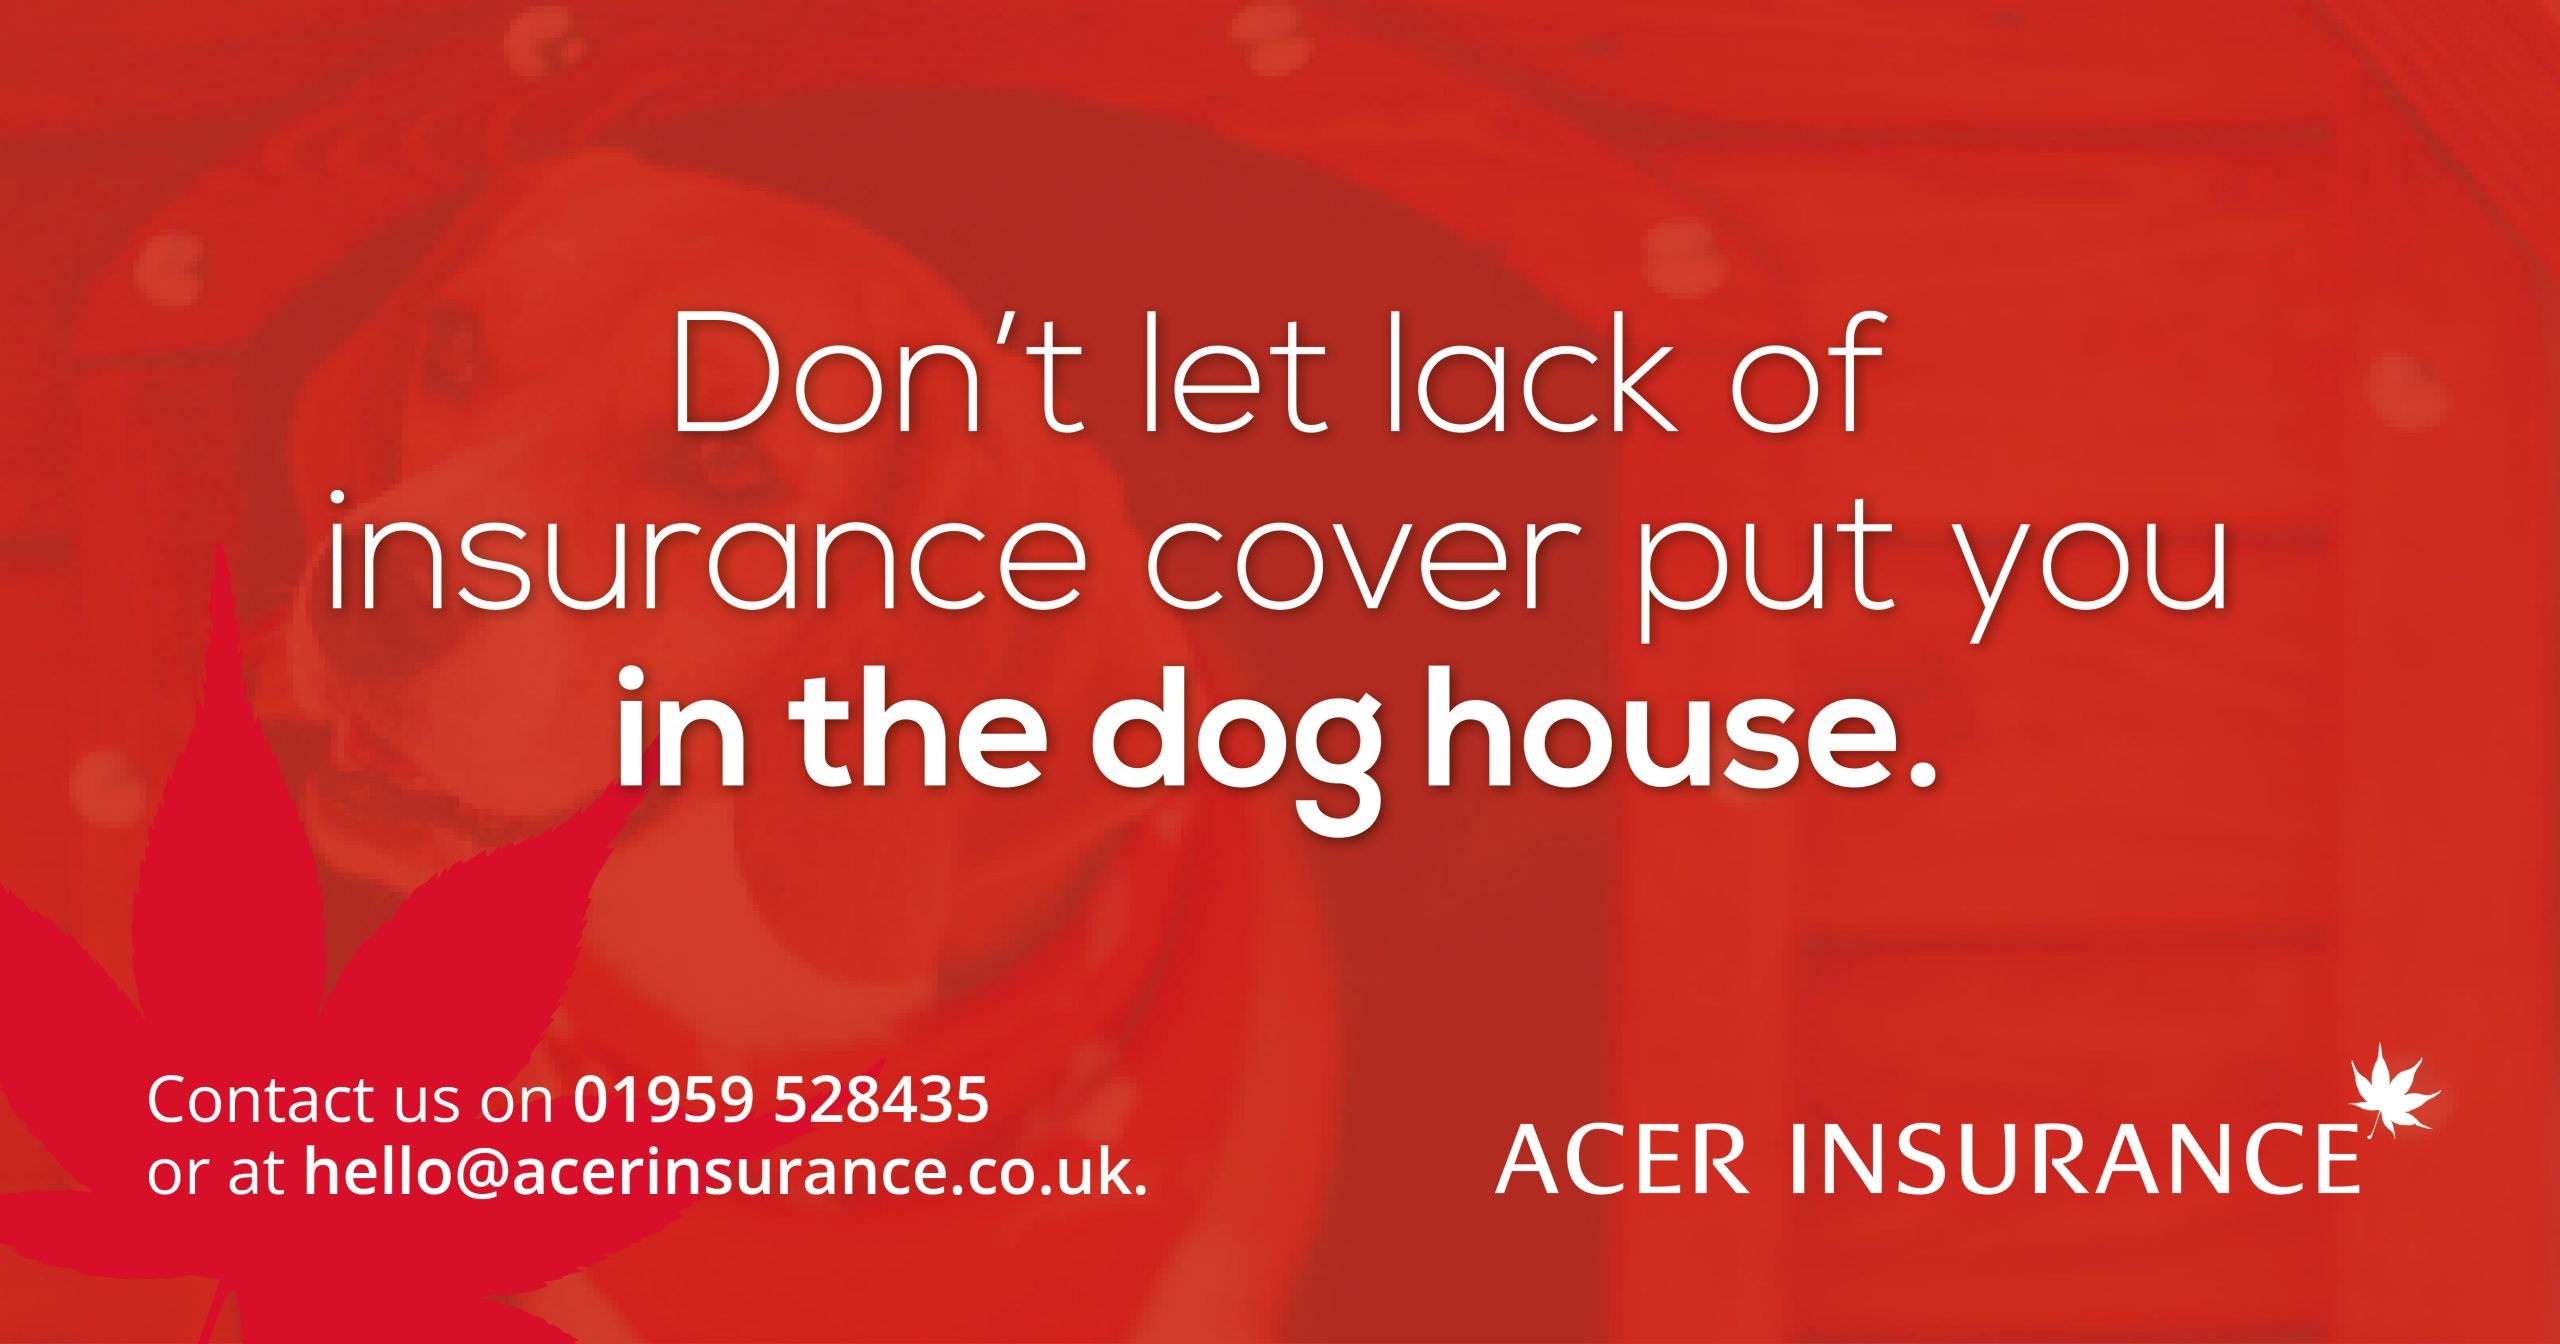 Don't let lack of flood insurance put you in the dog house